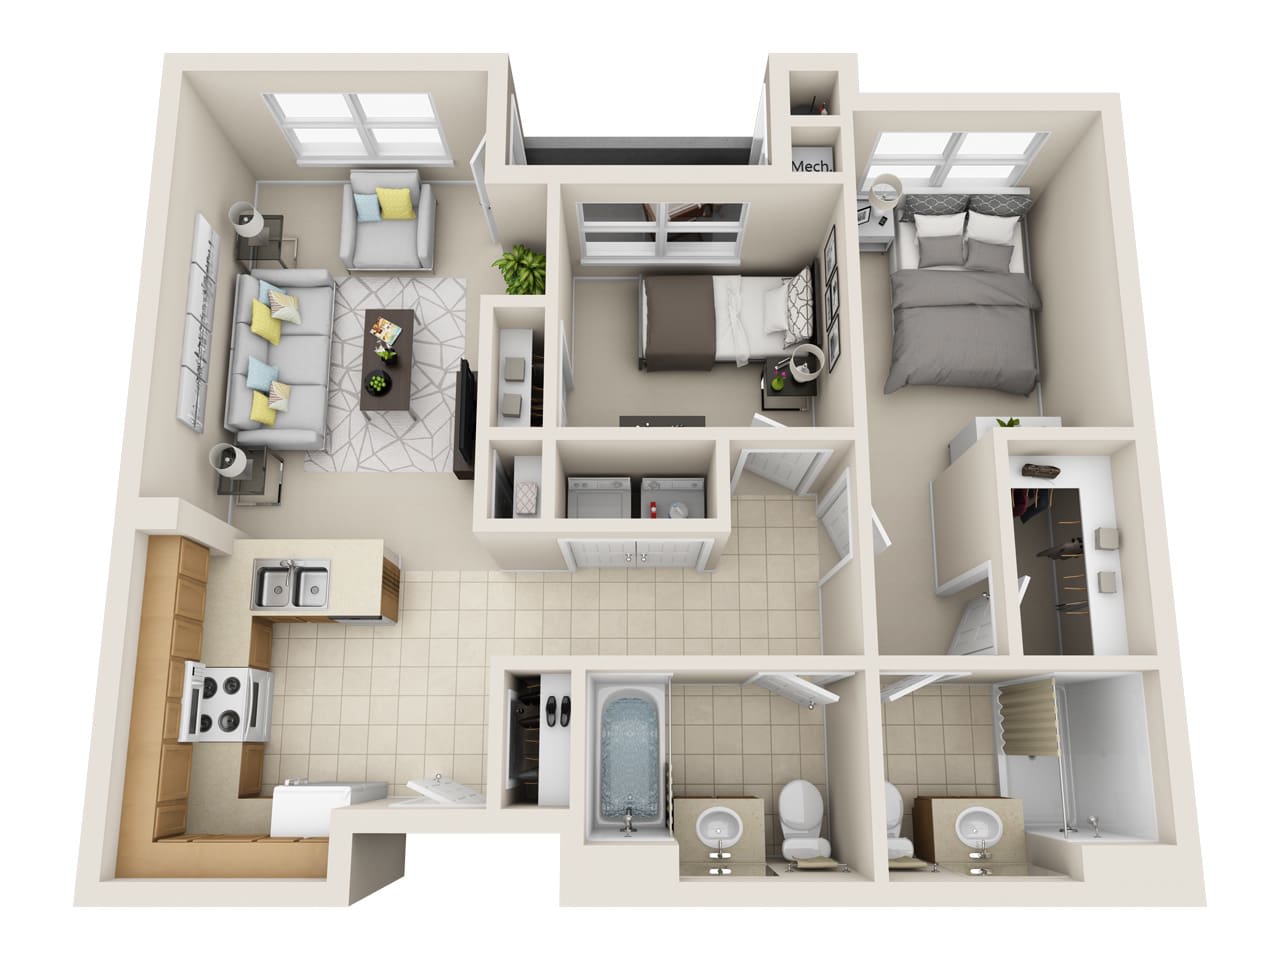 View 2 Bedroom Floor Plans at Sonoma Palms Apartments | Apartments in Las Vegas, Nevada